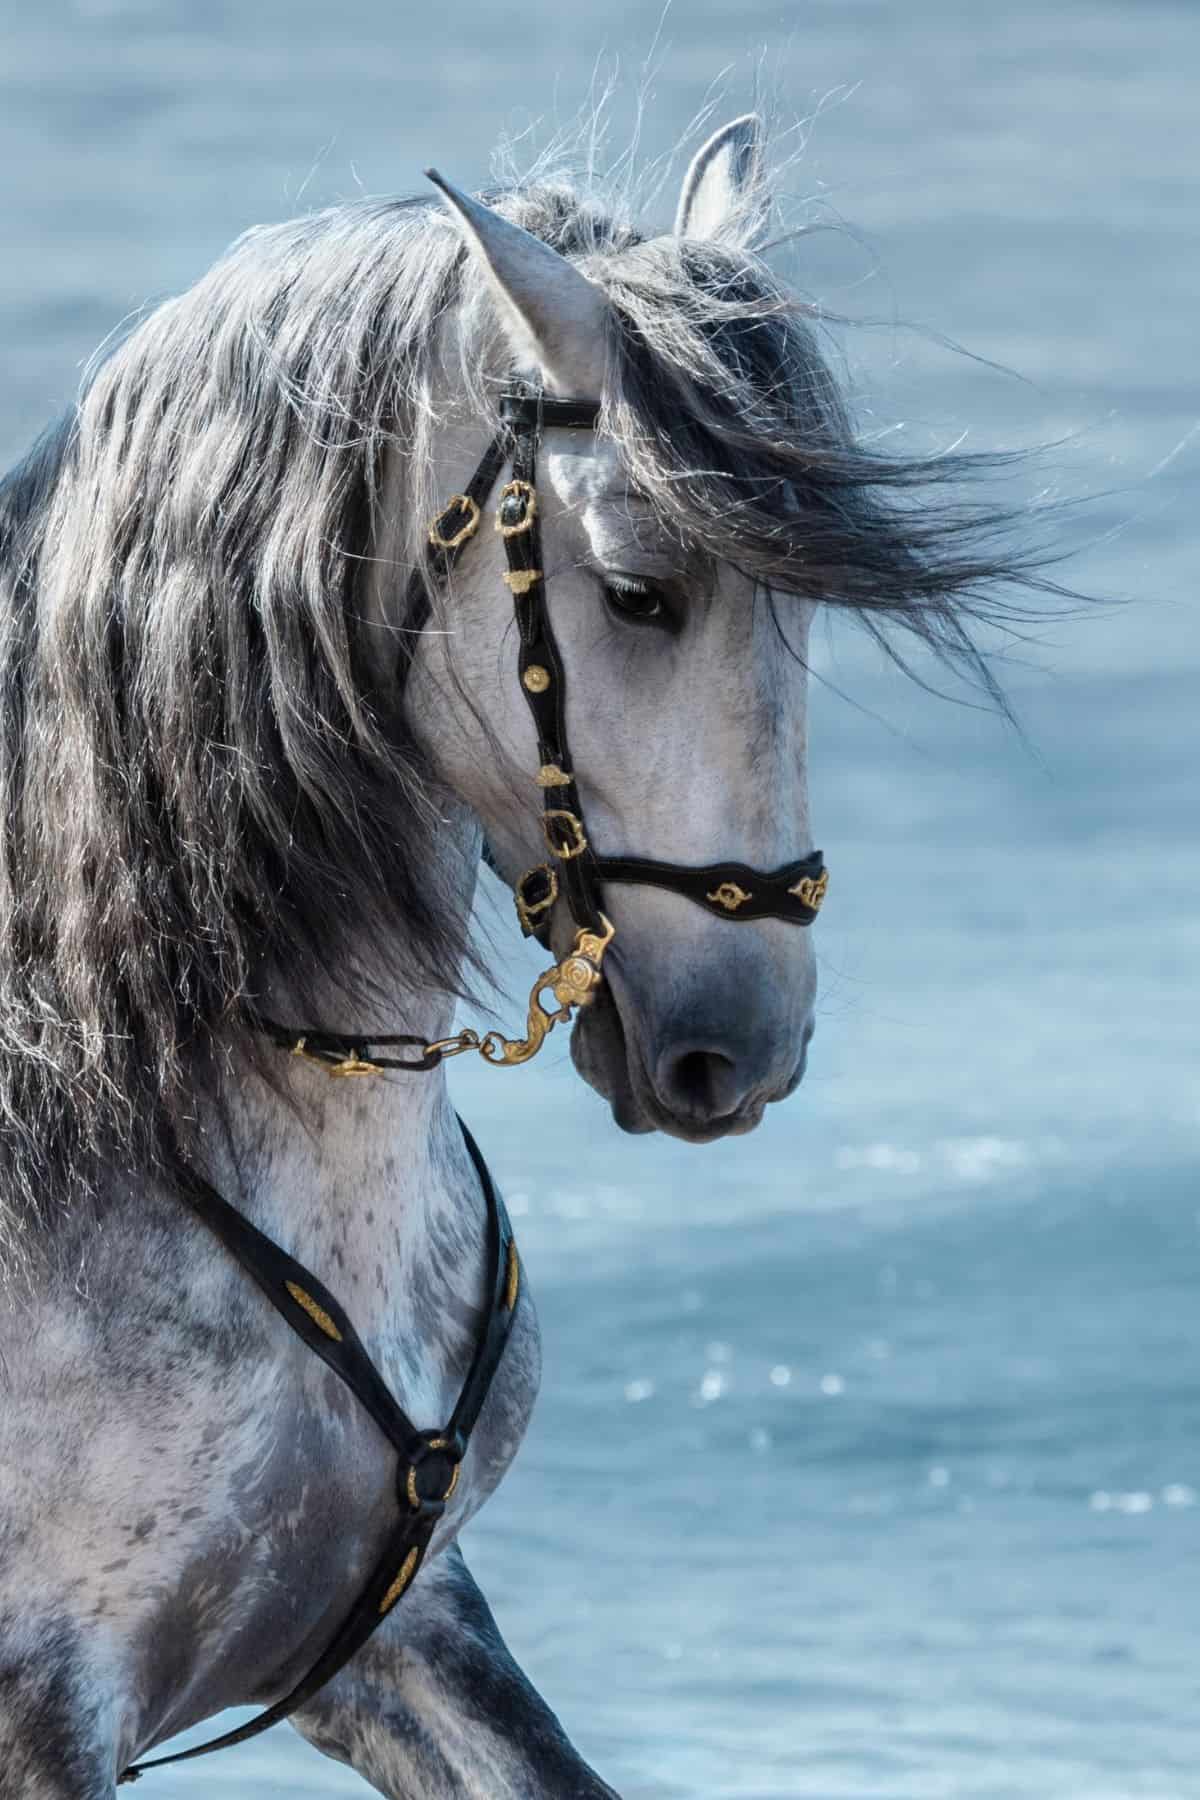 Gray horse in harness by water